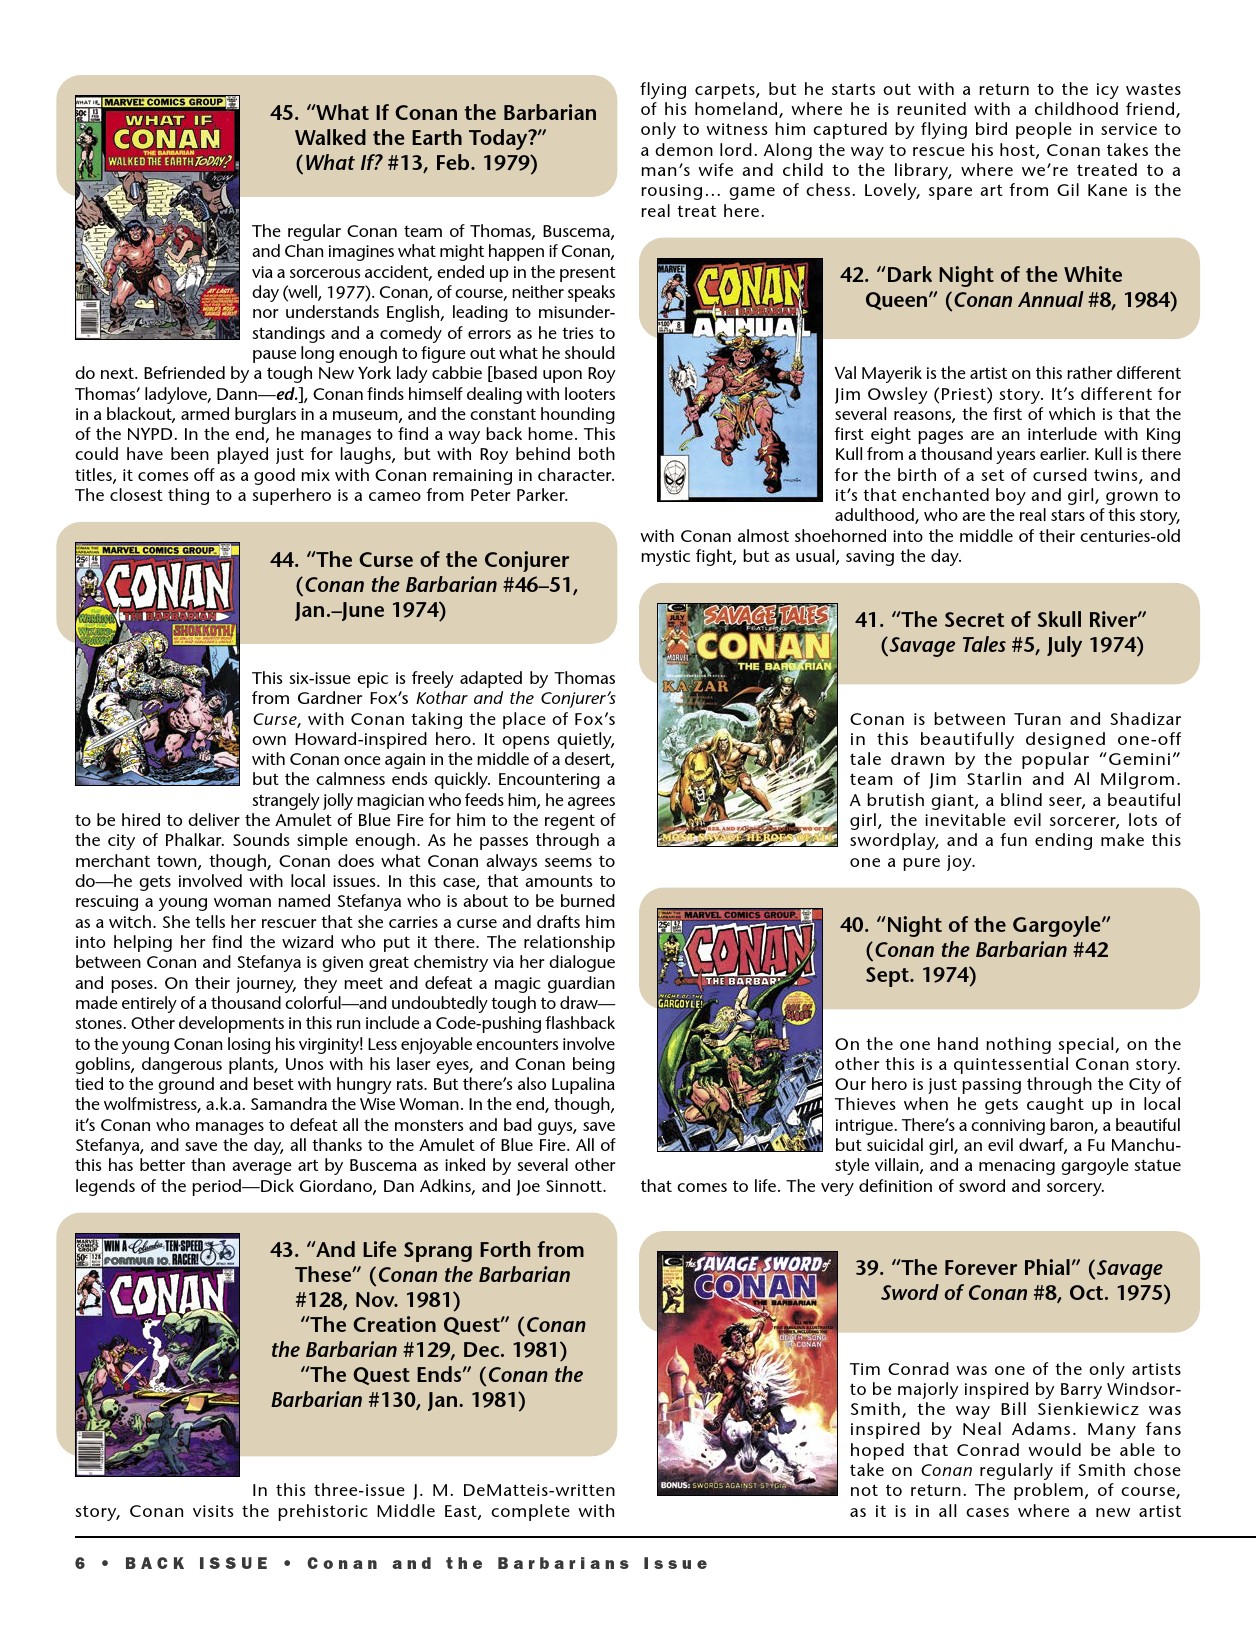 Read online Back Issue comic -  Issue #121 - 8